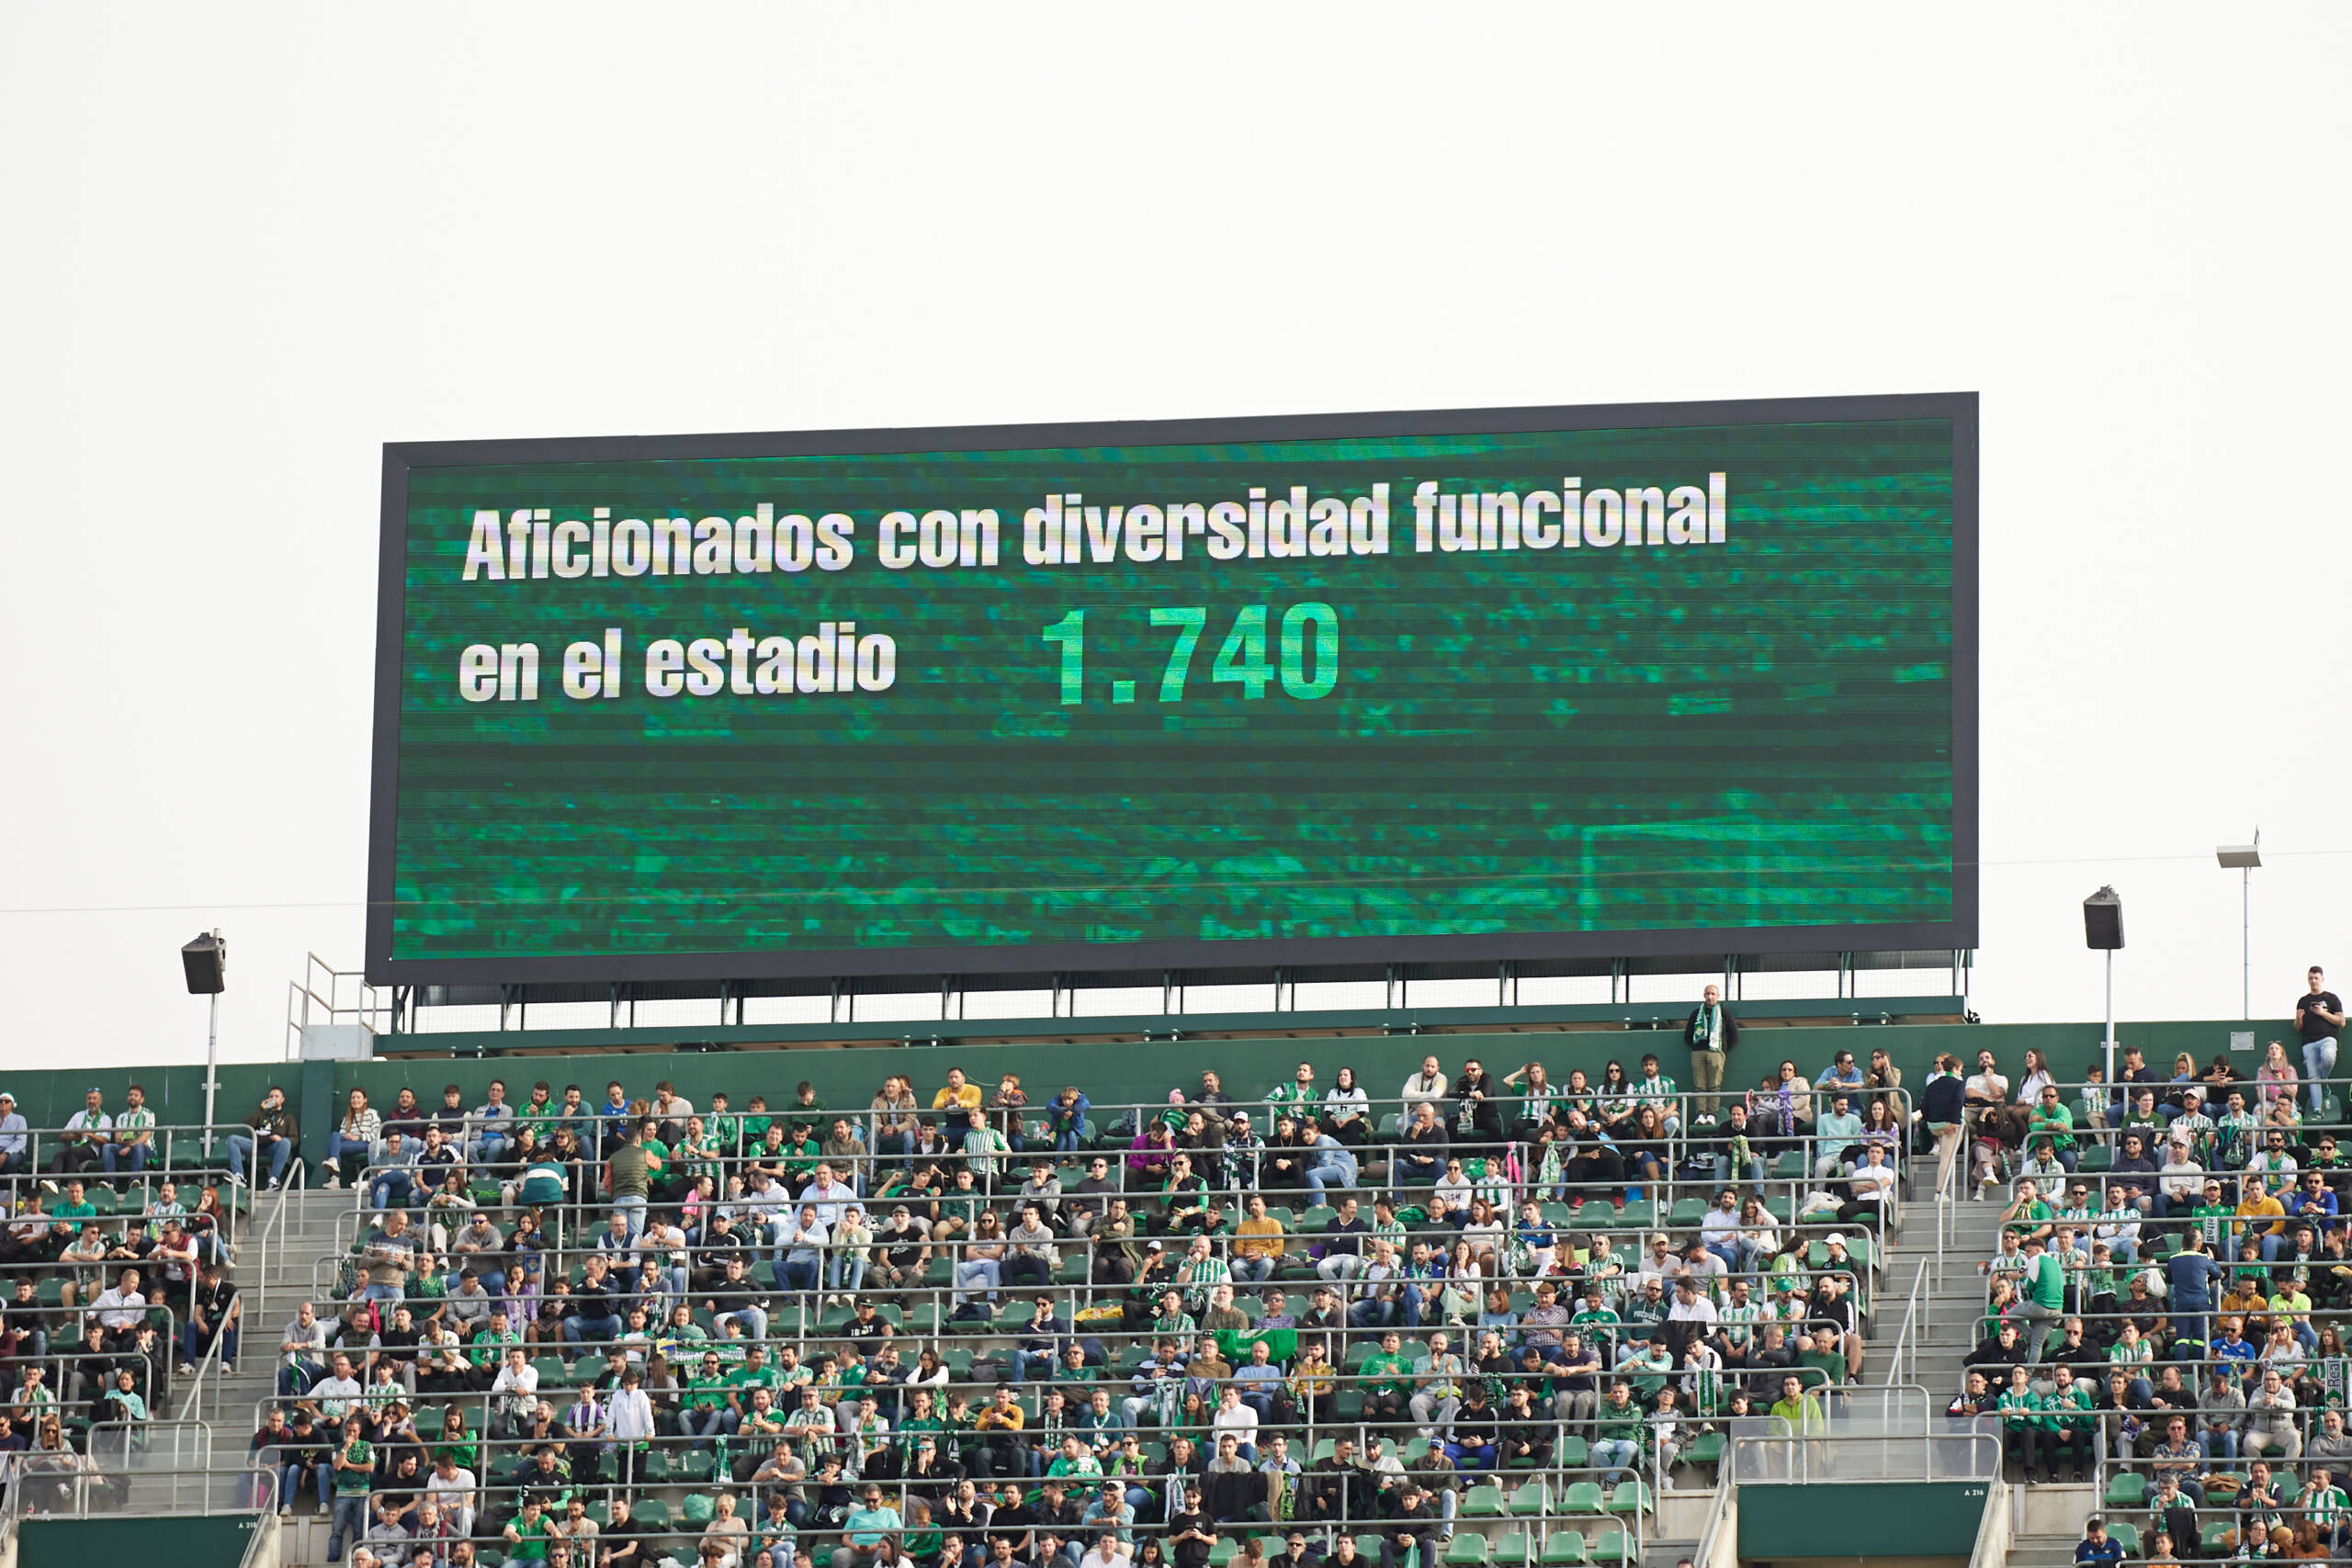 World Football Summit and Real Betis Balompié broke the world record for most inclusive match.